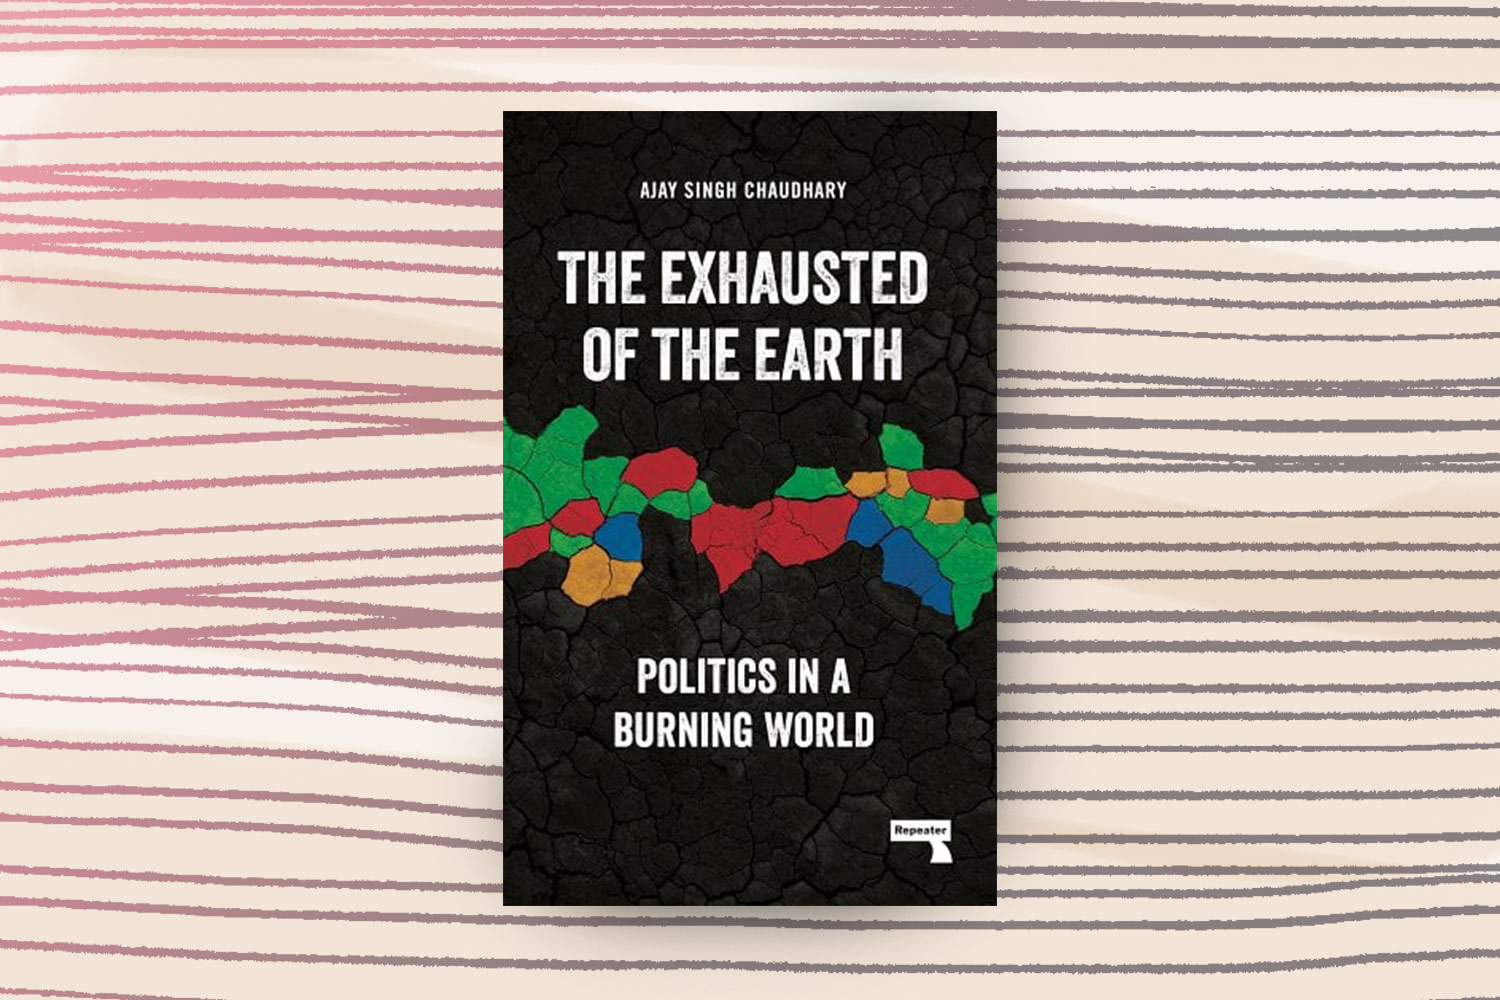 Ajay Singh Chaudhary, The Exhausted of the Earth: Politics in a Burning World